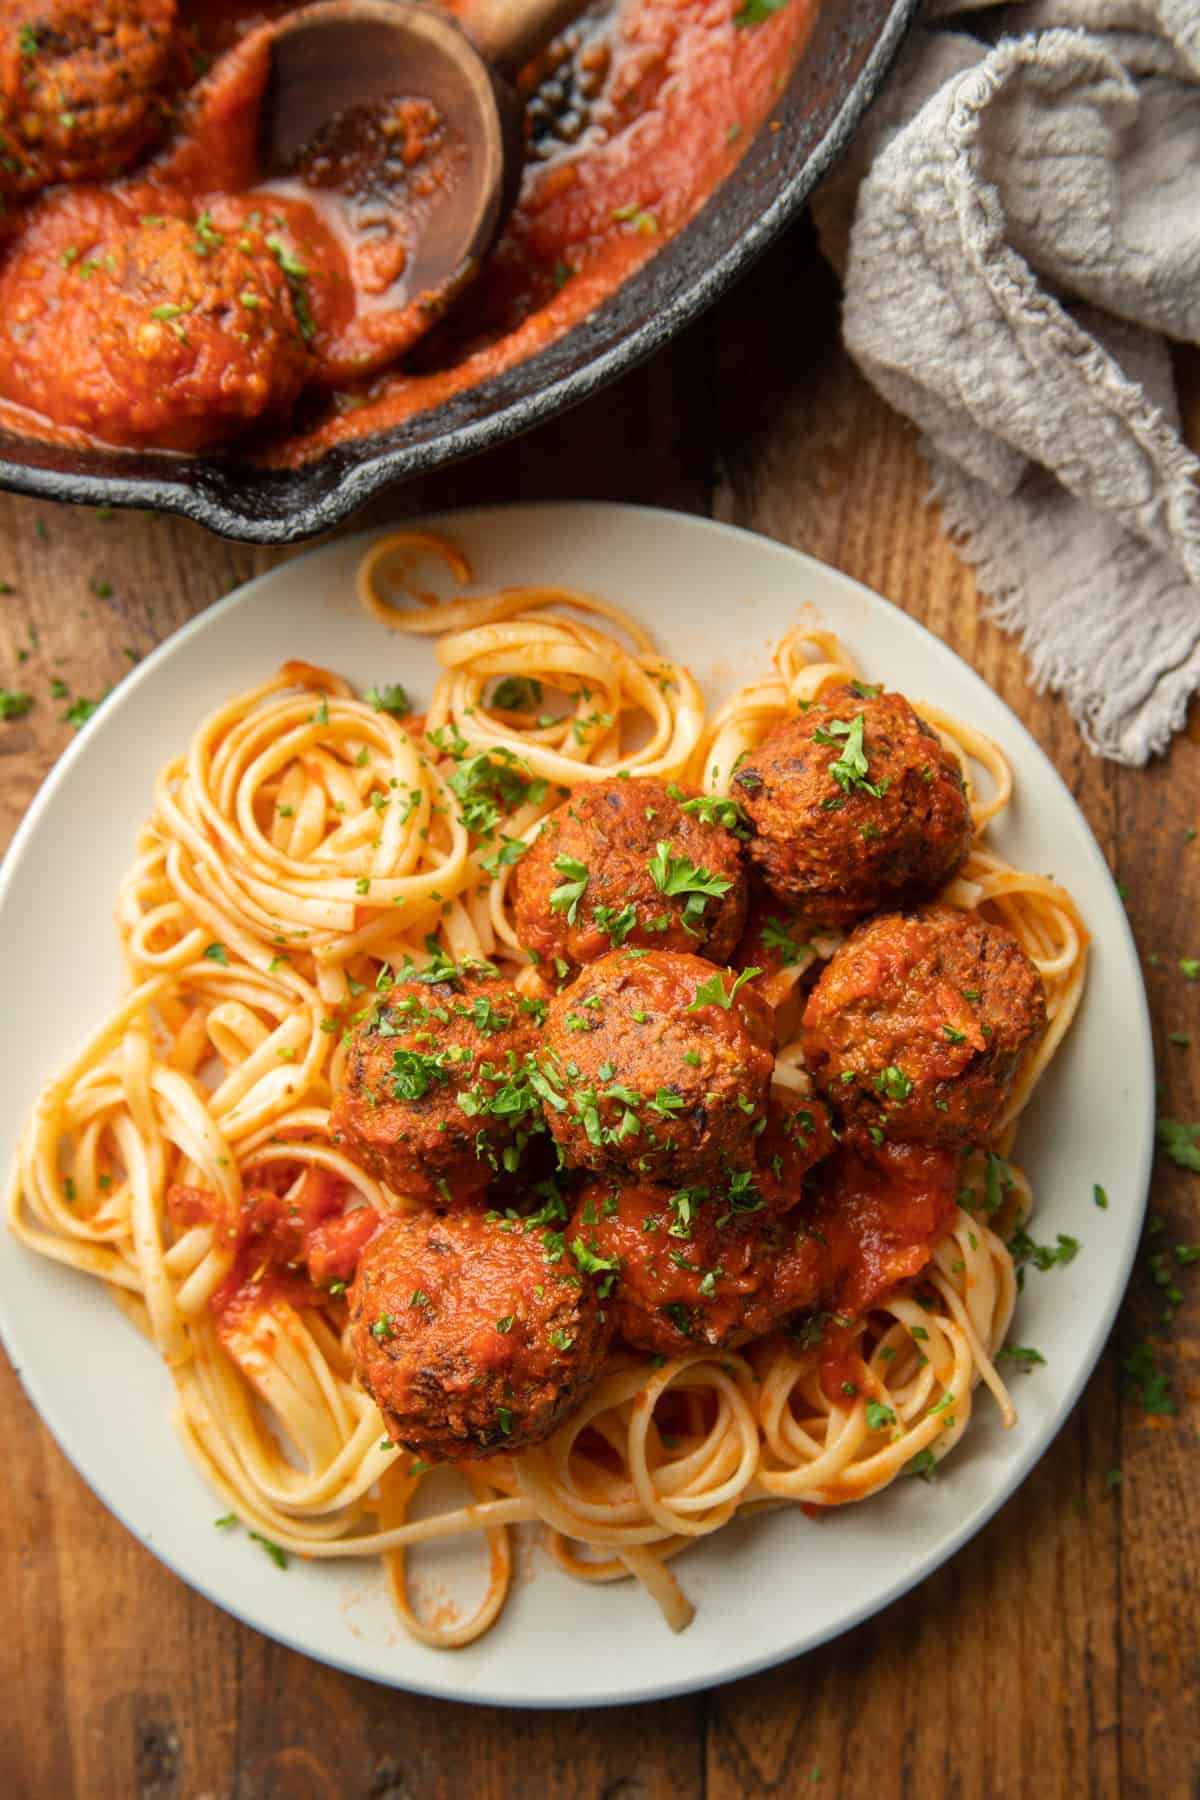 White wooden surface set with skillet and plate of spaghetti and Vegan Meatballs.